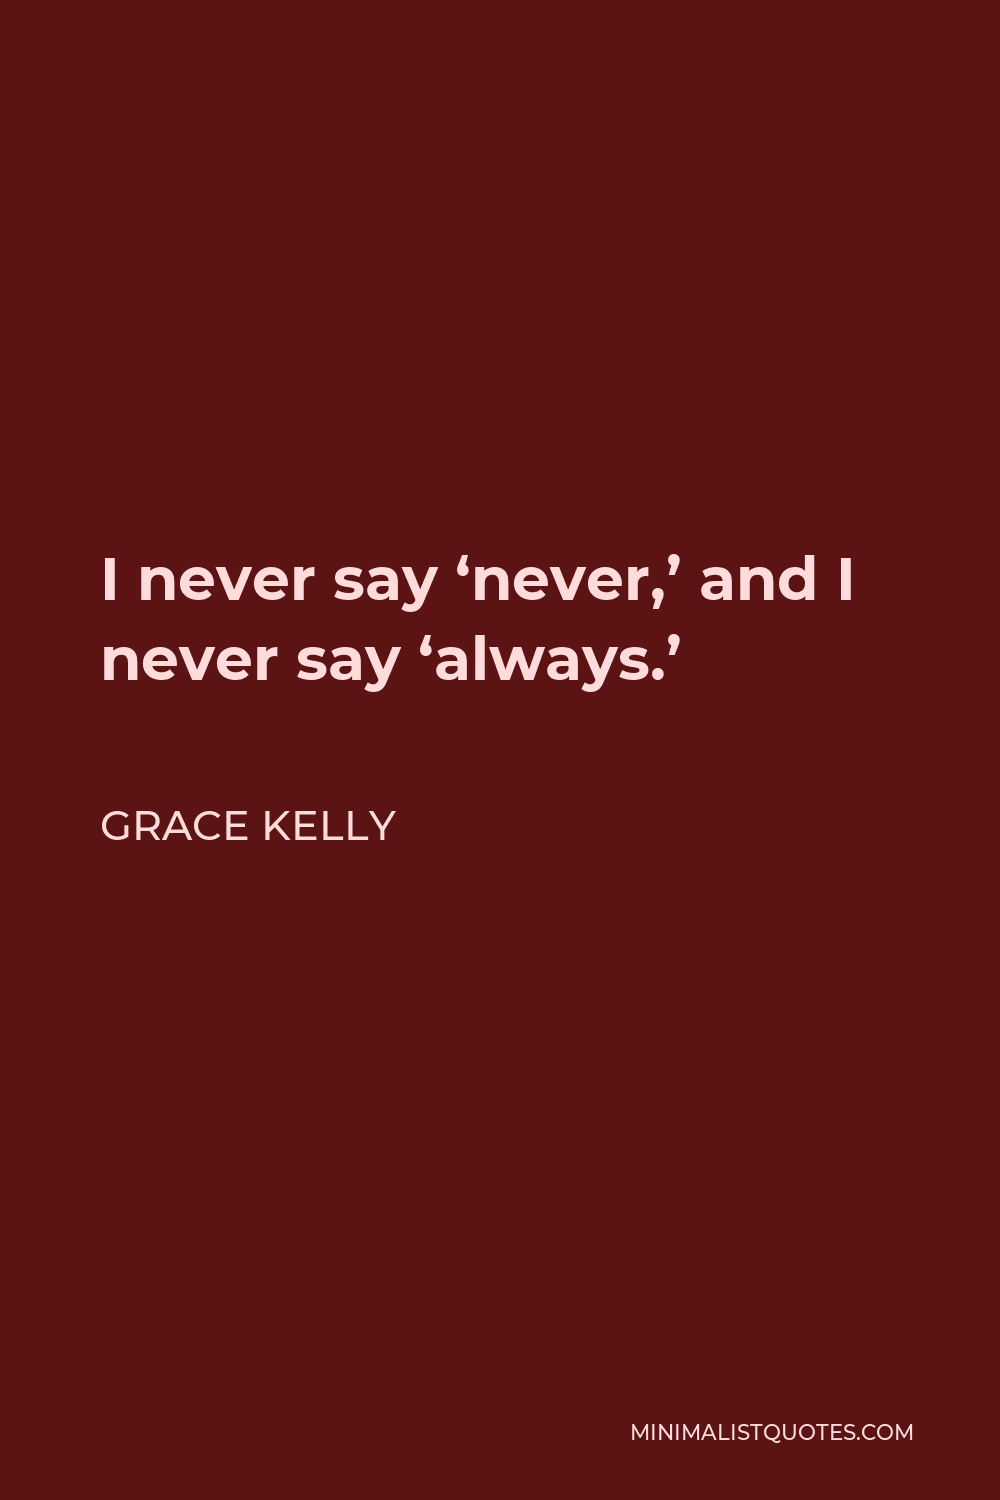 Grace Kelly Quote - I never say ‘never,’ and I never say ‘always.’